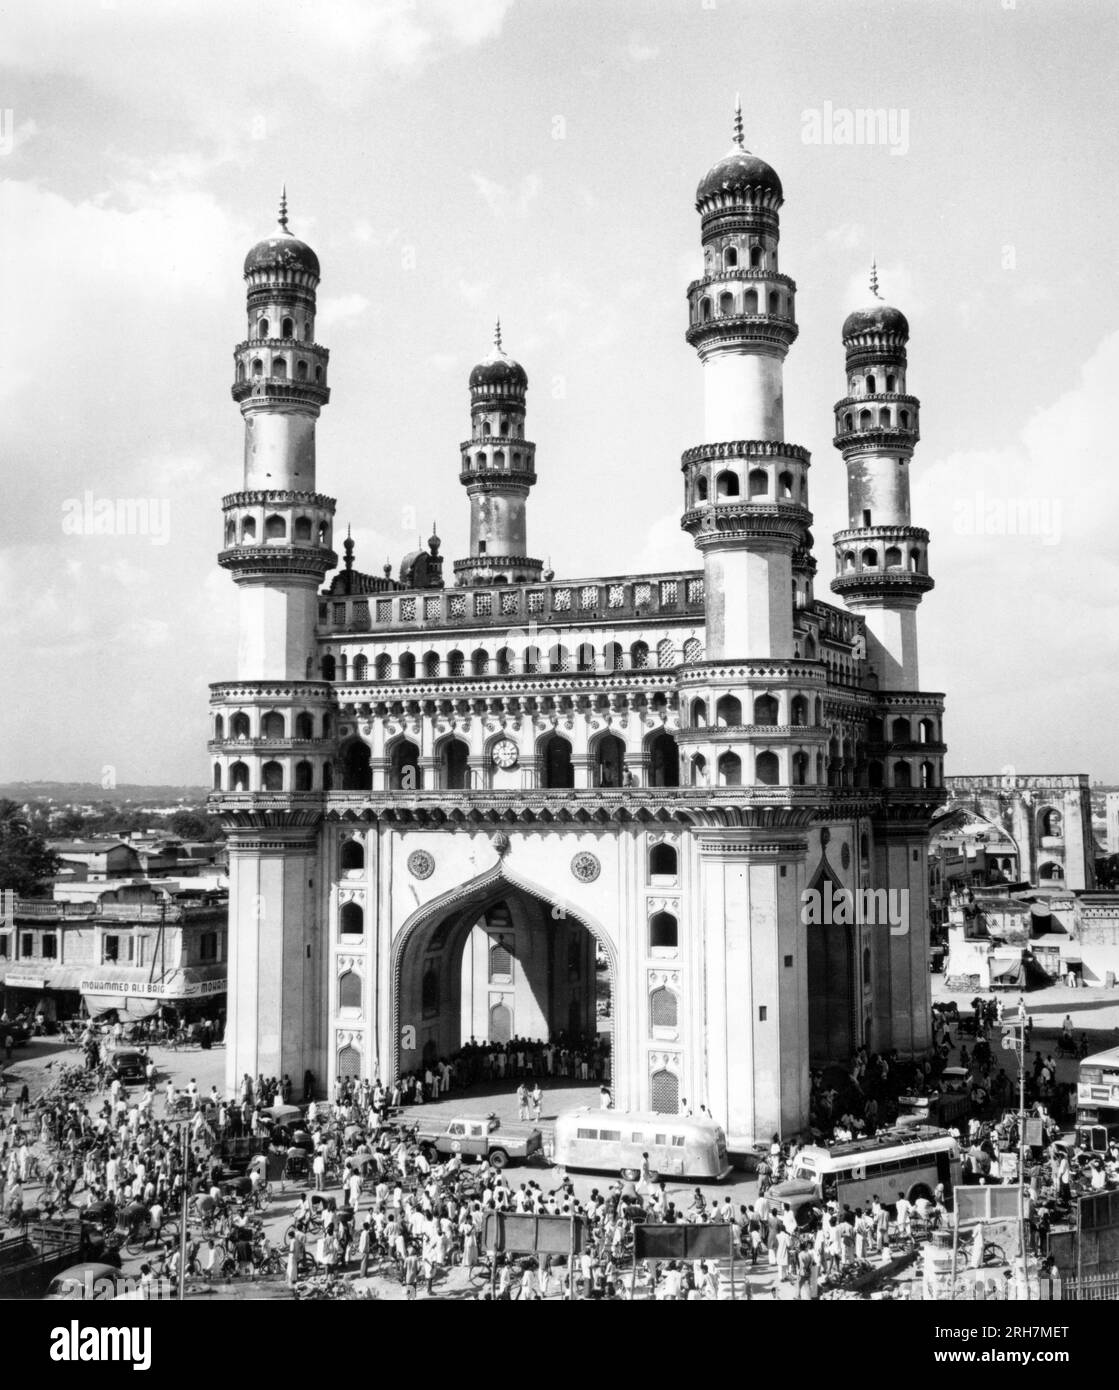 An Airstream Trailer at the Char Minar monument (1591) in Hyderabad, India Stock Photo